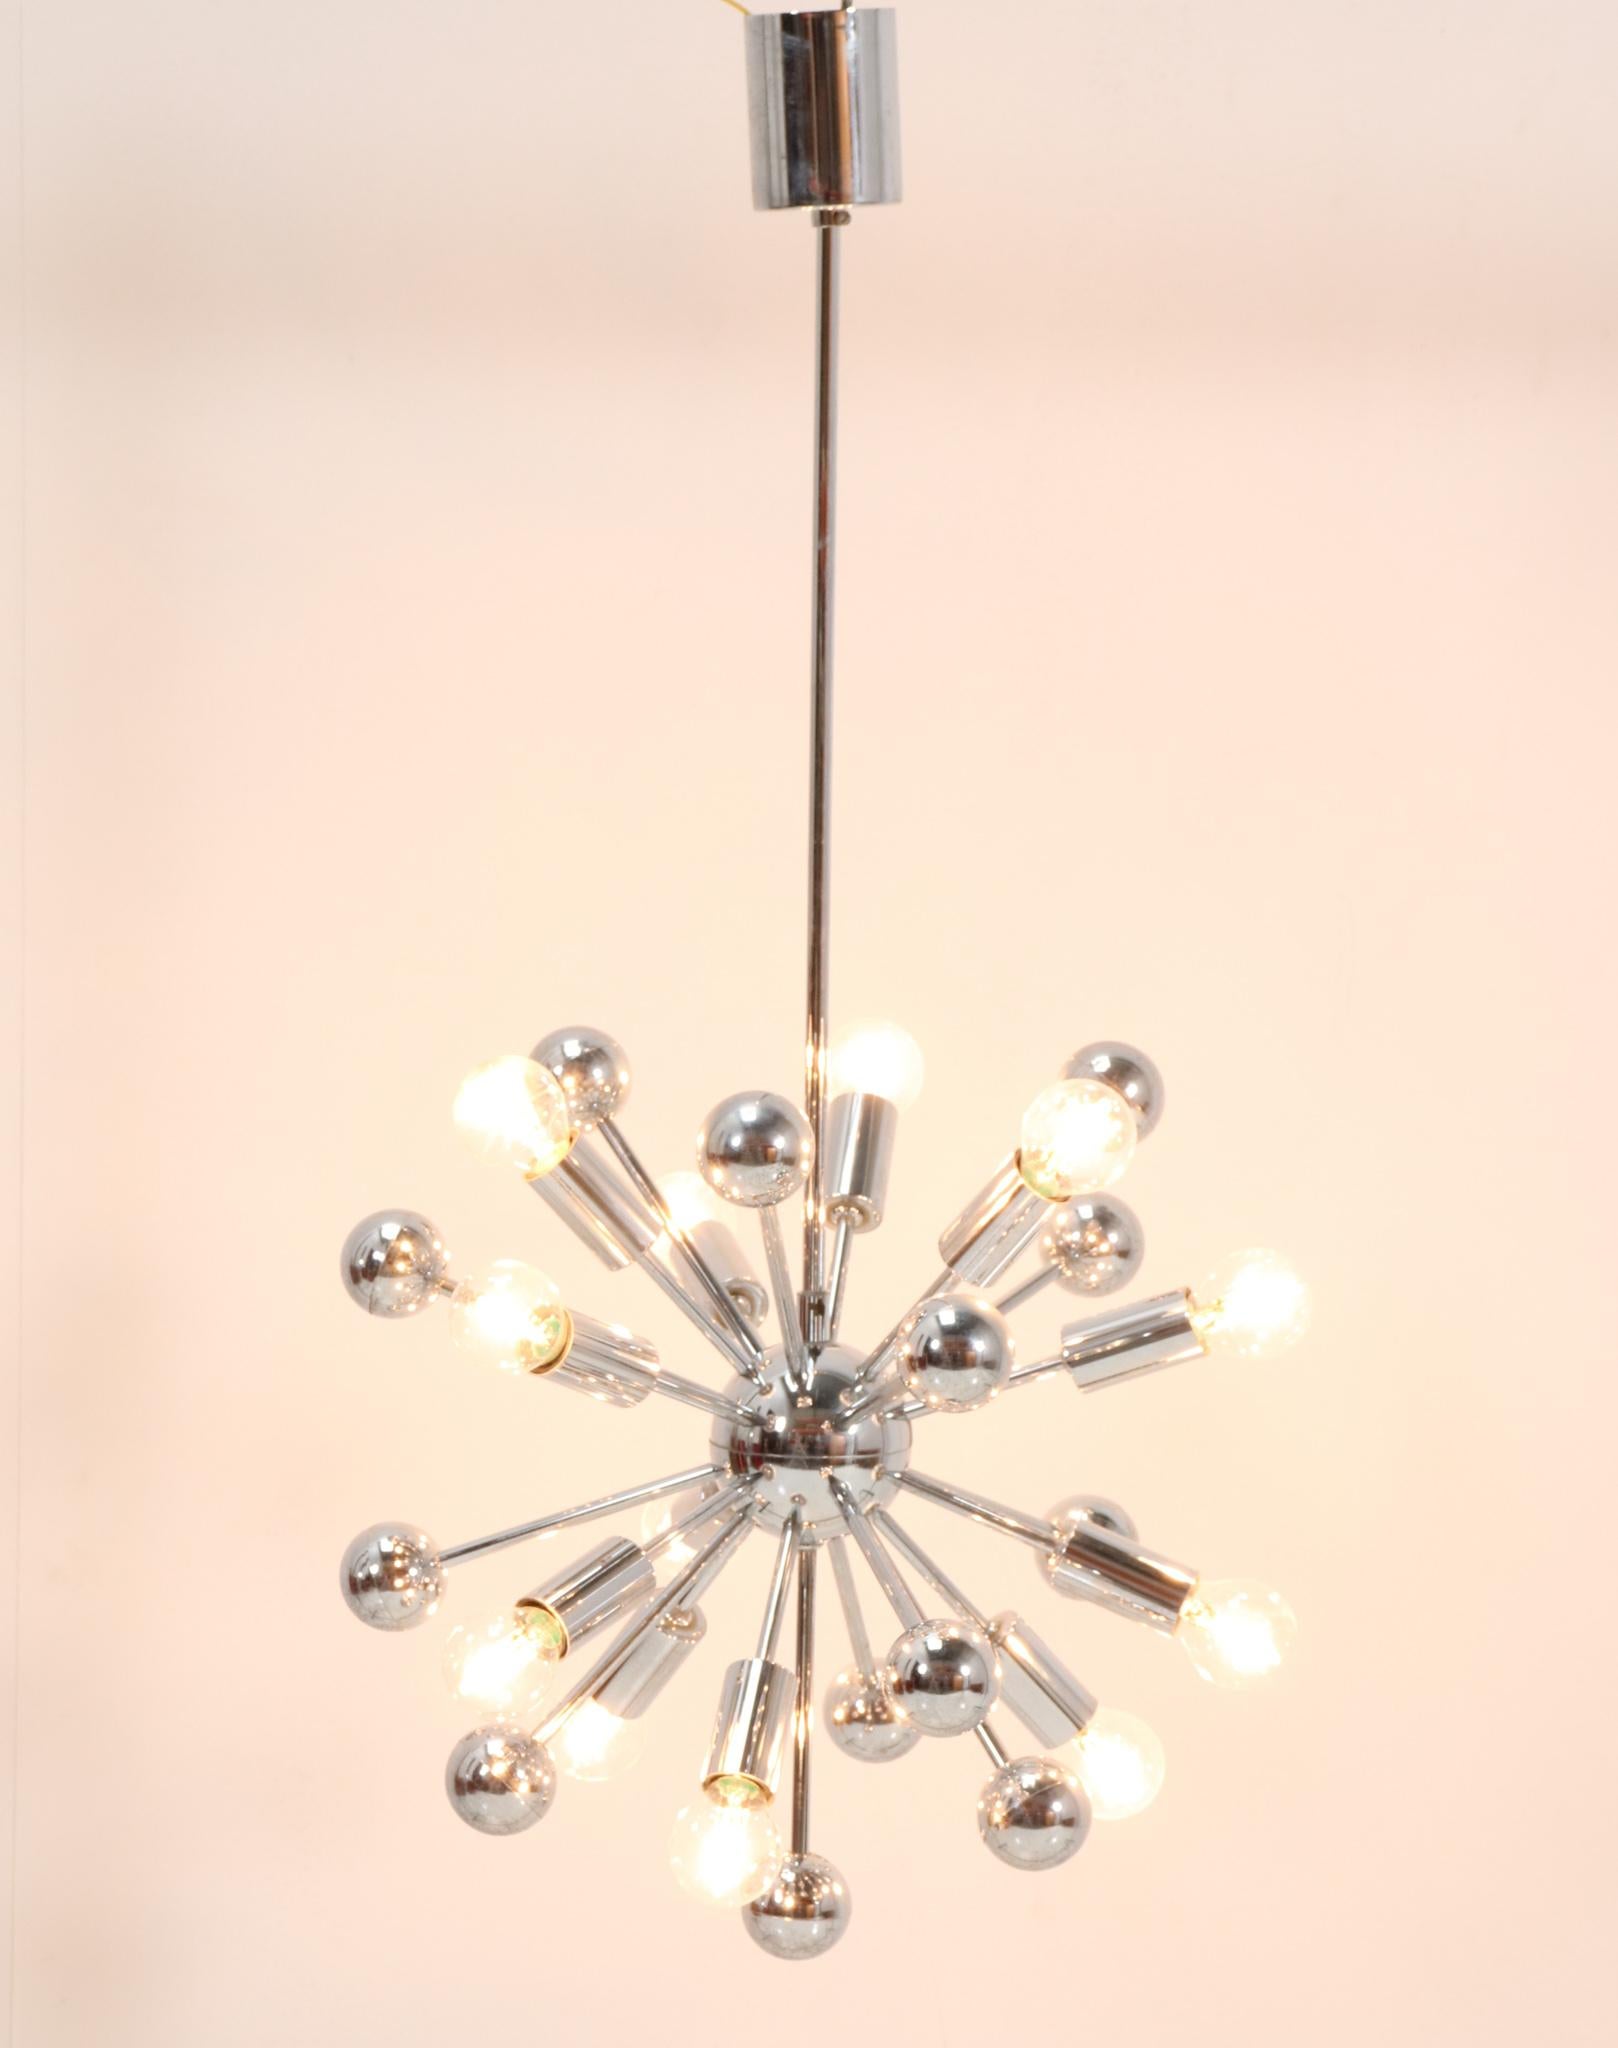 Stunning Mid-Century Modern Sputnik chandelier.
Striking French design from the 1970s.
This wonderful Mid-Century Modern Sputnik chandelier
is made of chromed steel.
Rewired with ten original sockets for E-14 light bulbs.
In very good condition